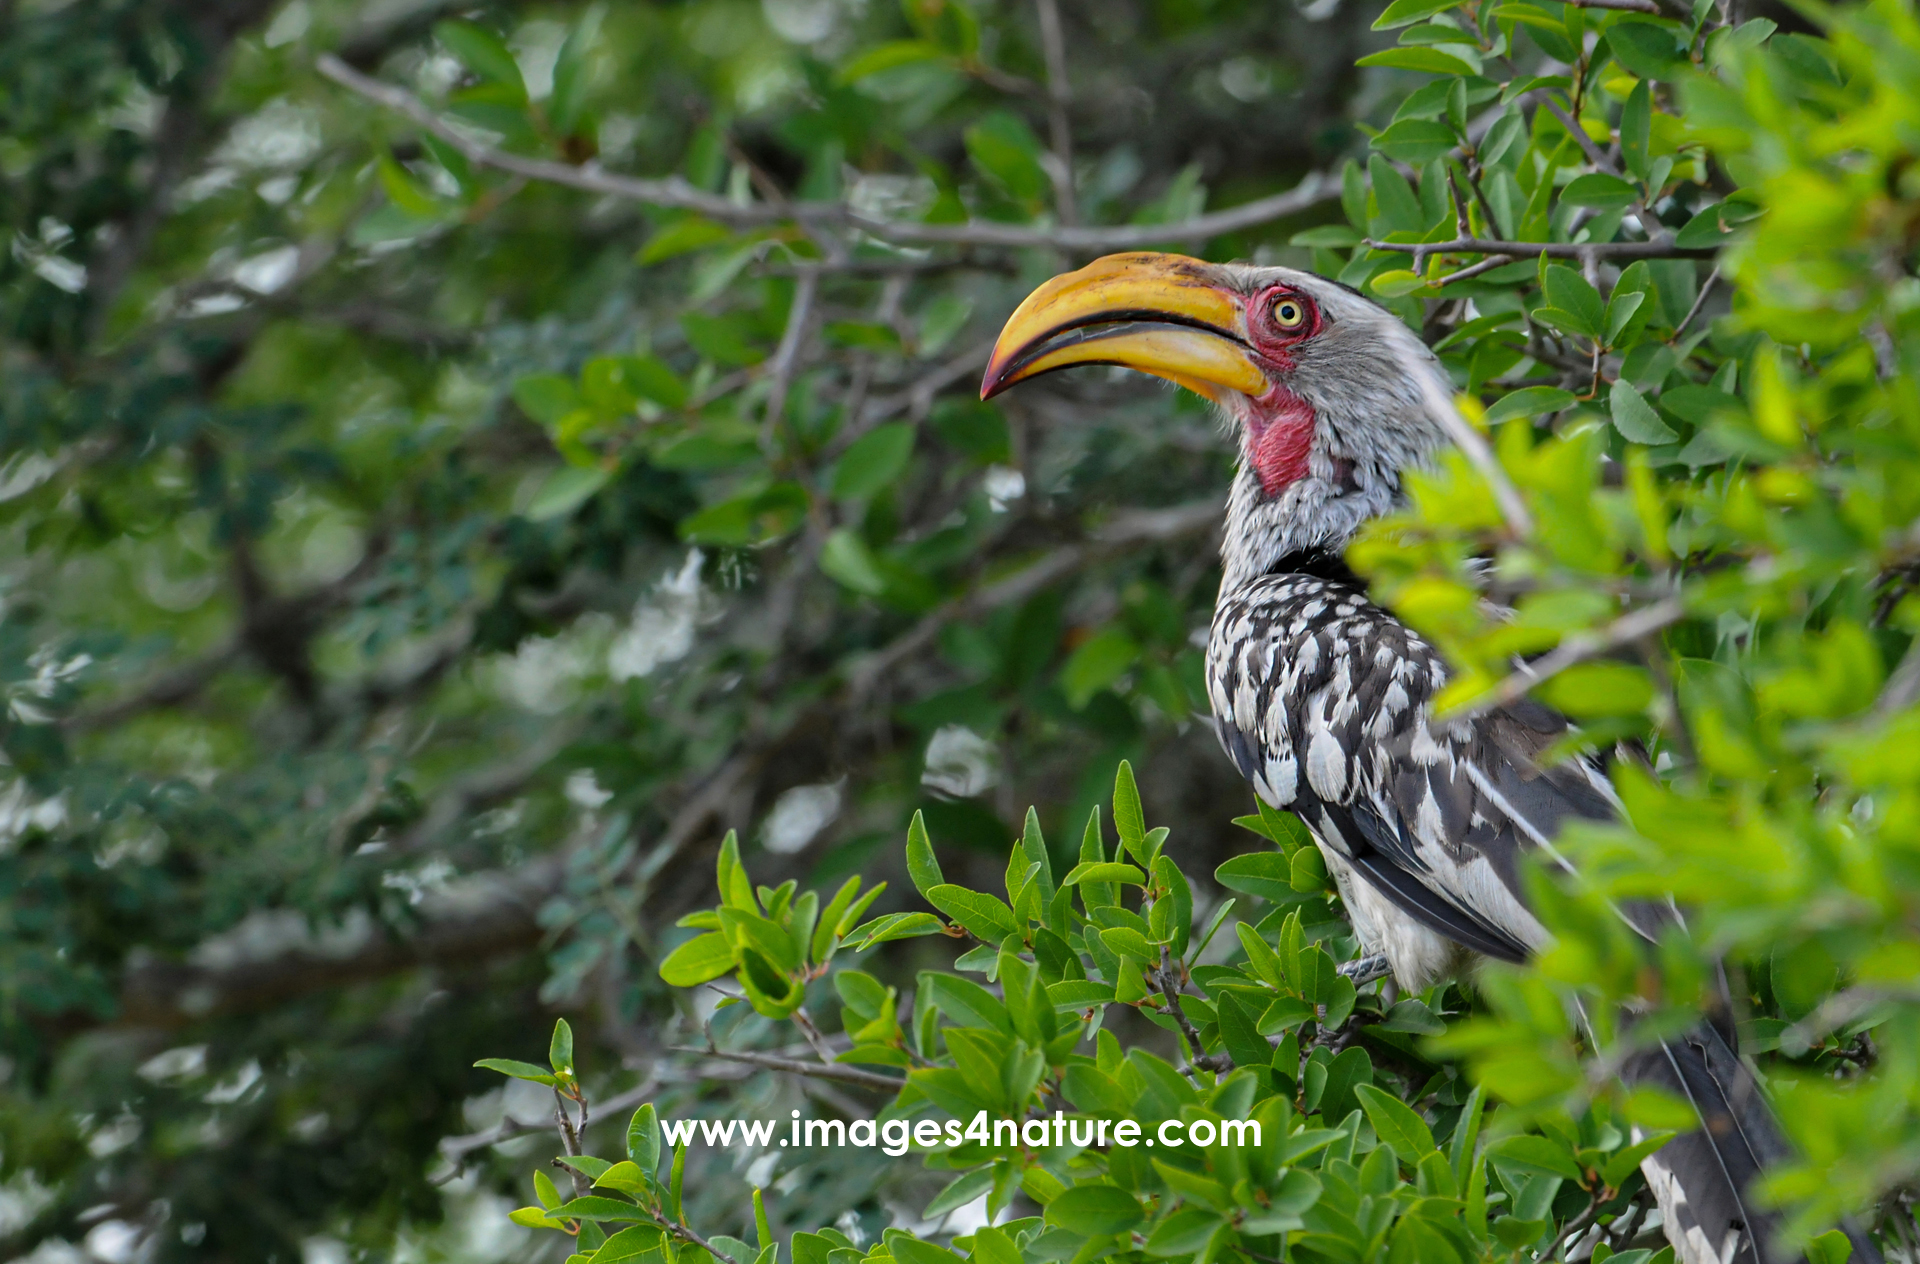 Side view of a yellow-billed Southern hornbill bird sitting in a tree